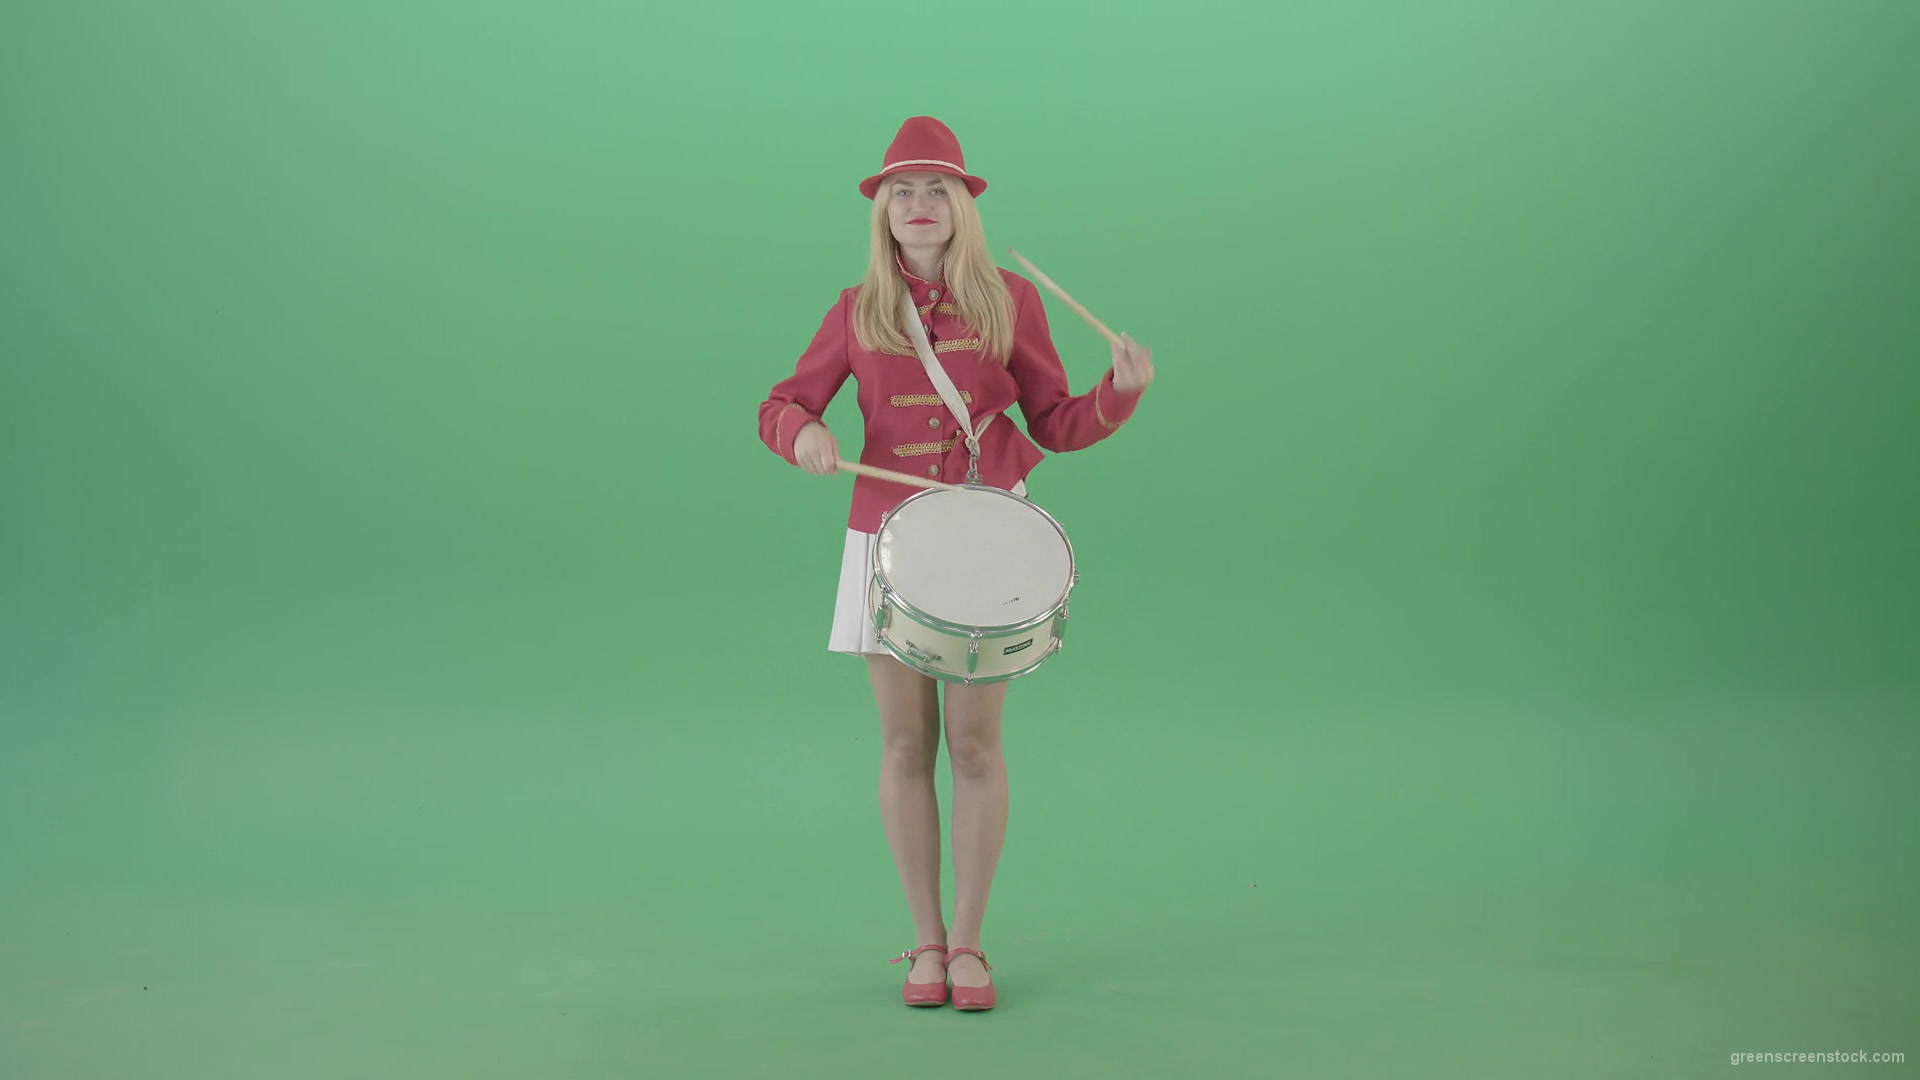 Girl-in-18-Century-military-uniform-play-snare-drum-isolated-on-green-screen-4K-Video-Footage-1920_008 Green Screen Stock